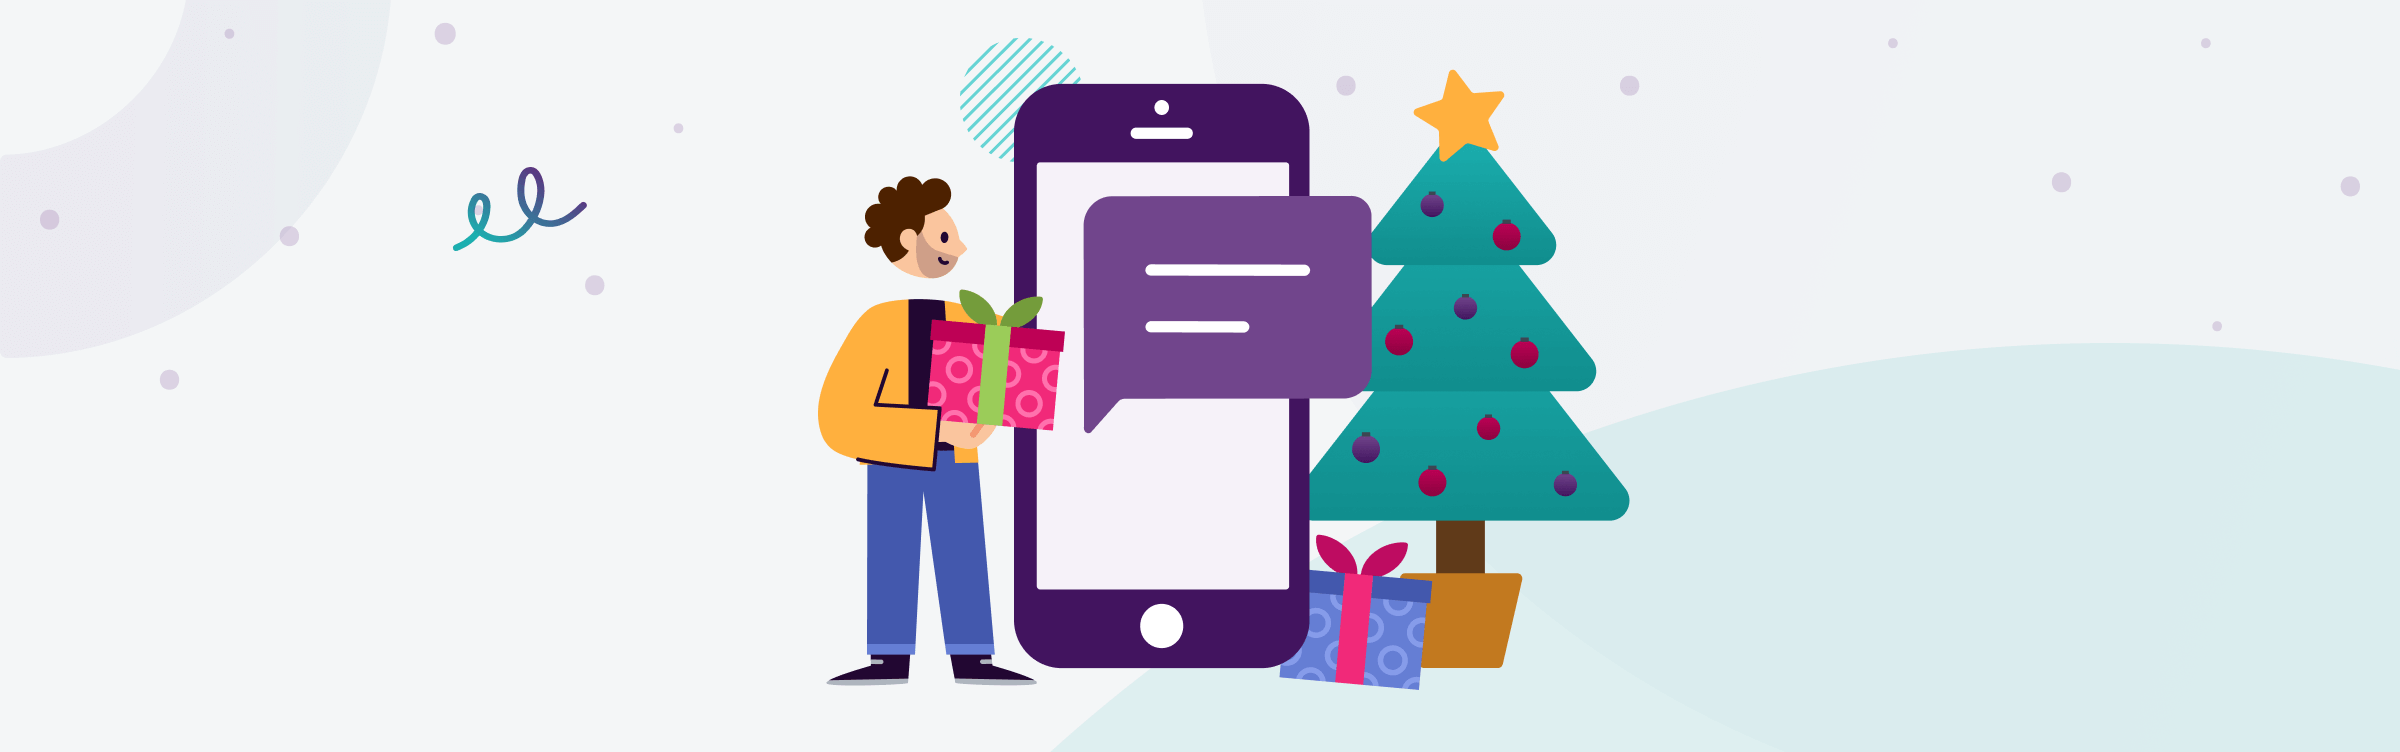 cartoon person holding out a Christmas present through a phone to represent the benefits of SMS automations during the holiday season